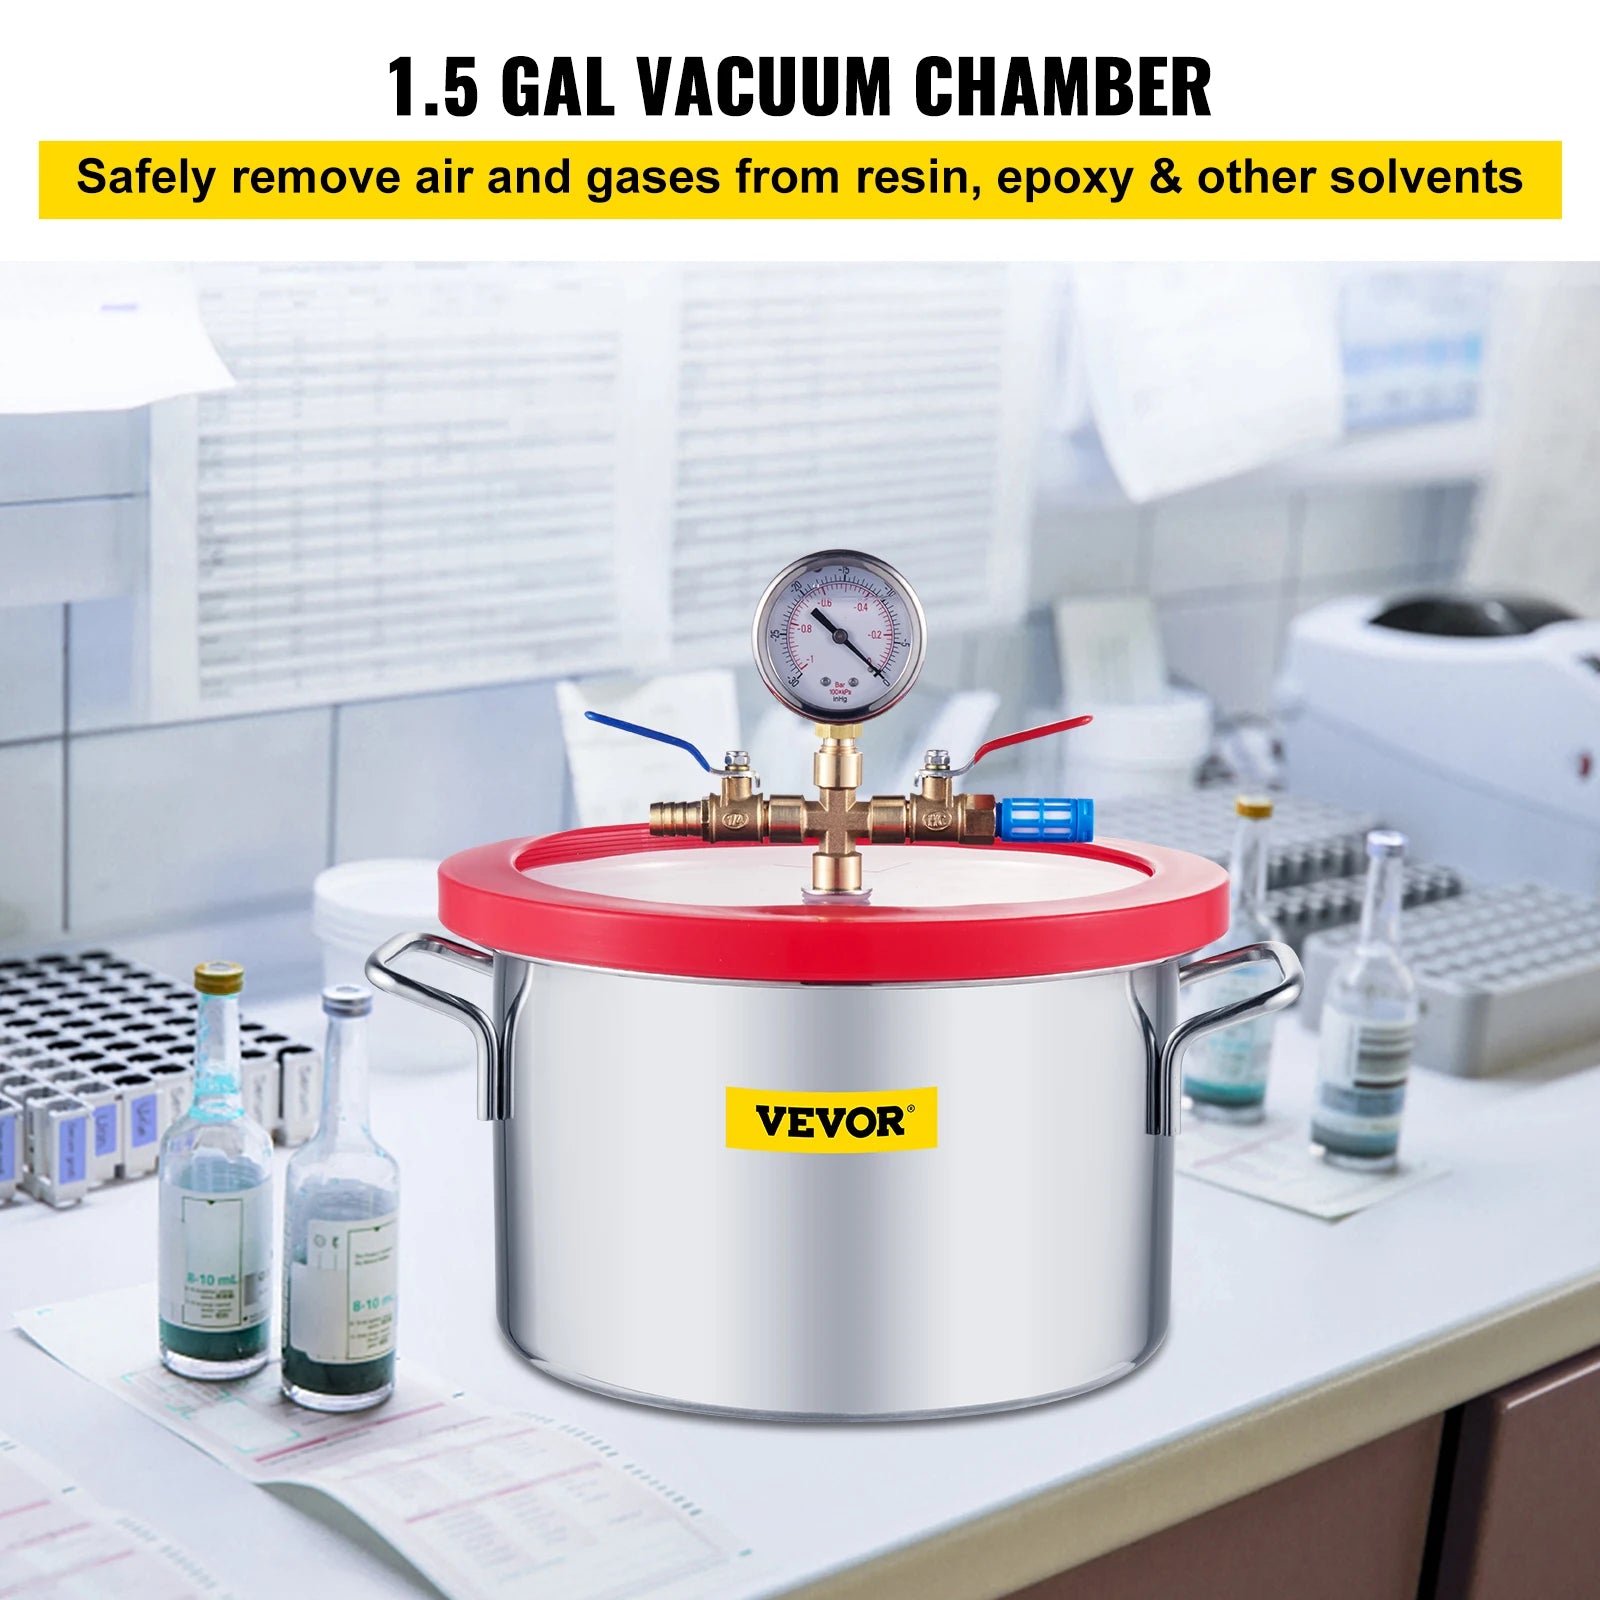 VEVOR Stainless Steel Vacuum Chamber 1.5-5 Gallon Vacuum Degassing Chamber Glass Lid Silicones for Gas Extraction and Protect Fo